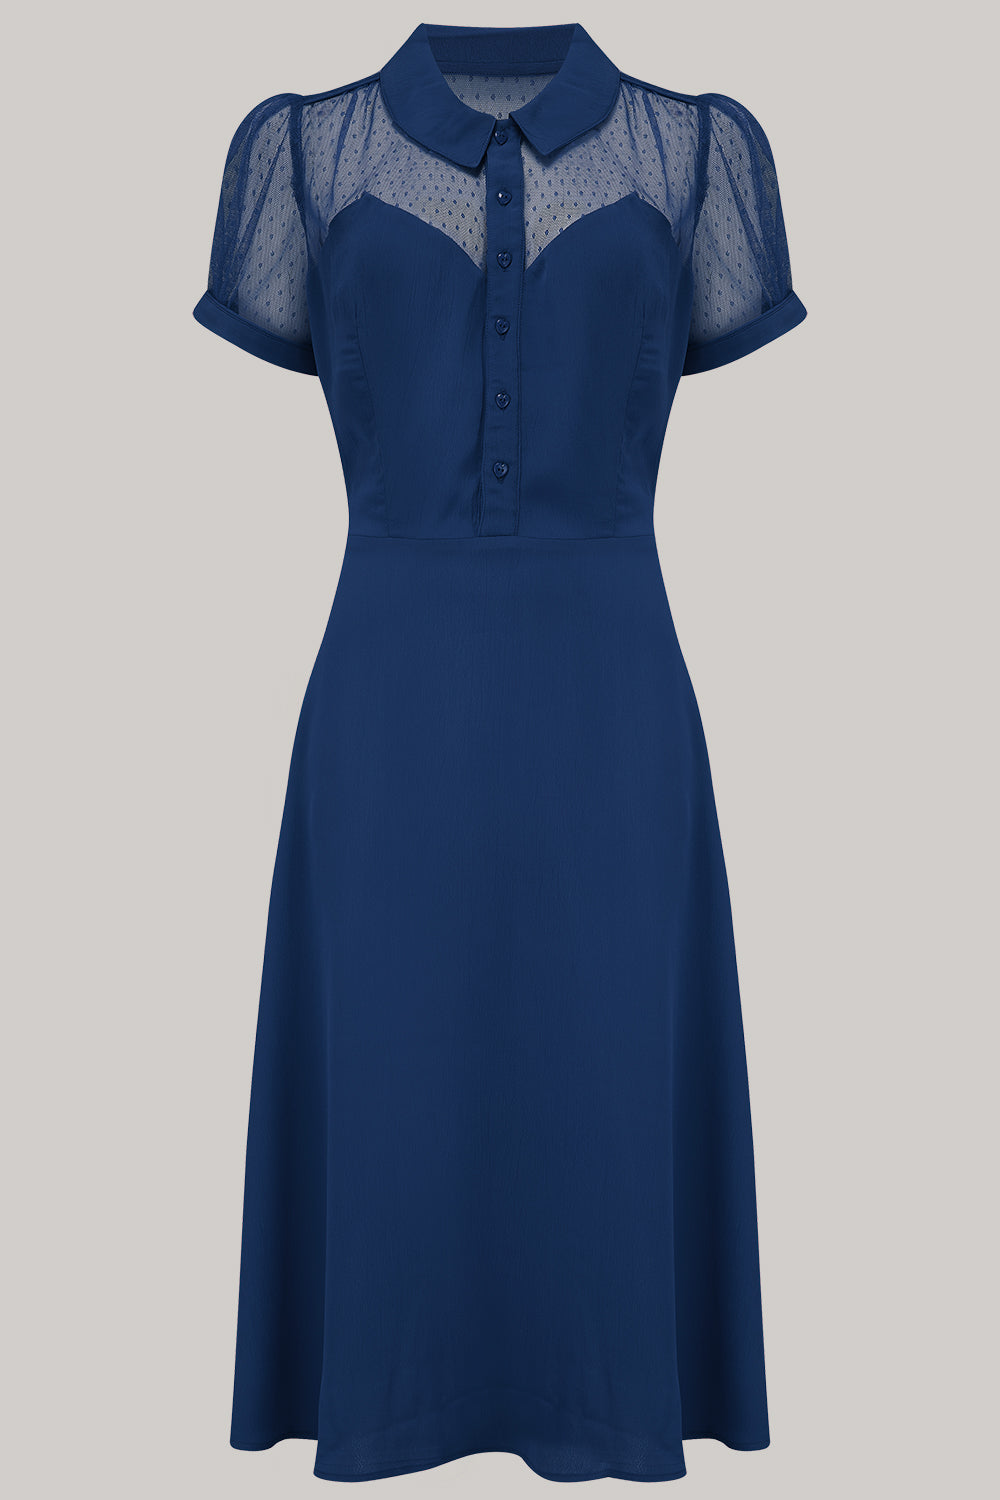 "Florance" Tea Dress in Navy with matching Navy Lace upper, Authentic 1940s true vintage style - True and authentic vintage style clothing, inspired by the Classic styles of CC41 , WW2 and the fun 1950s RocknRoll era, for everyday wear plus events like Goodwood Revival, Twinwood Festival and Viva Las Vegas Rockabilly Weekend Rock n Romance The Seamstress Of Bloomsbury